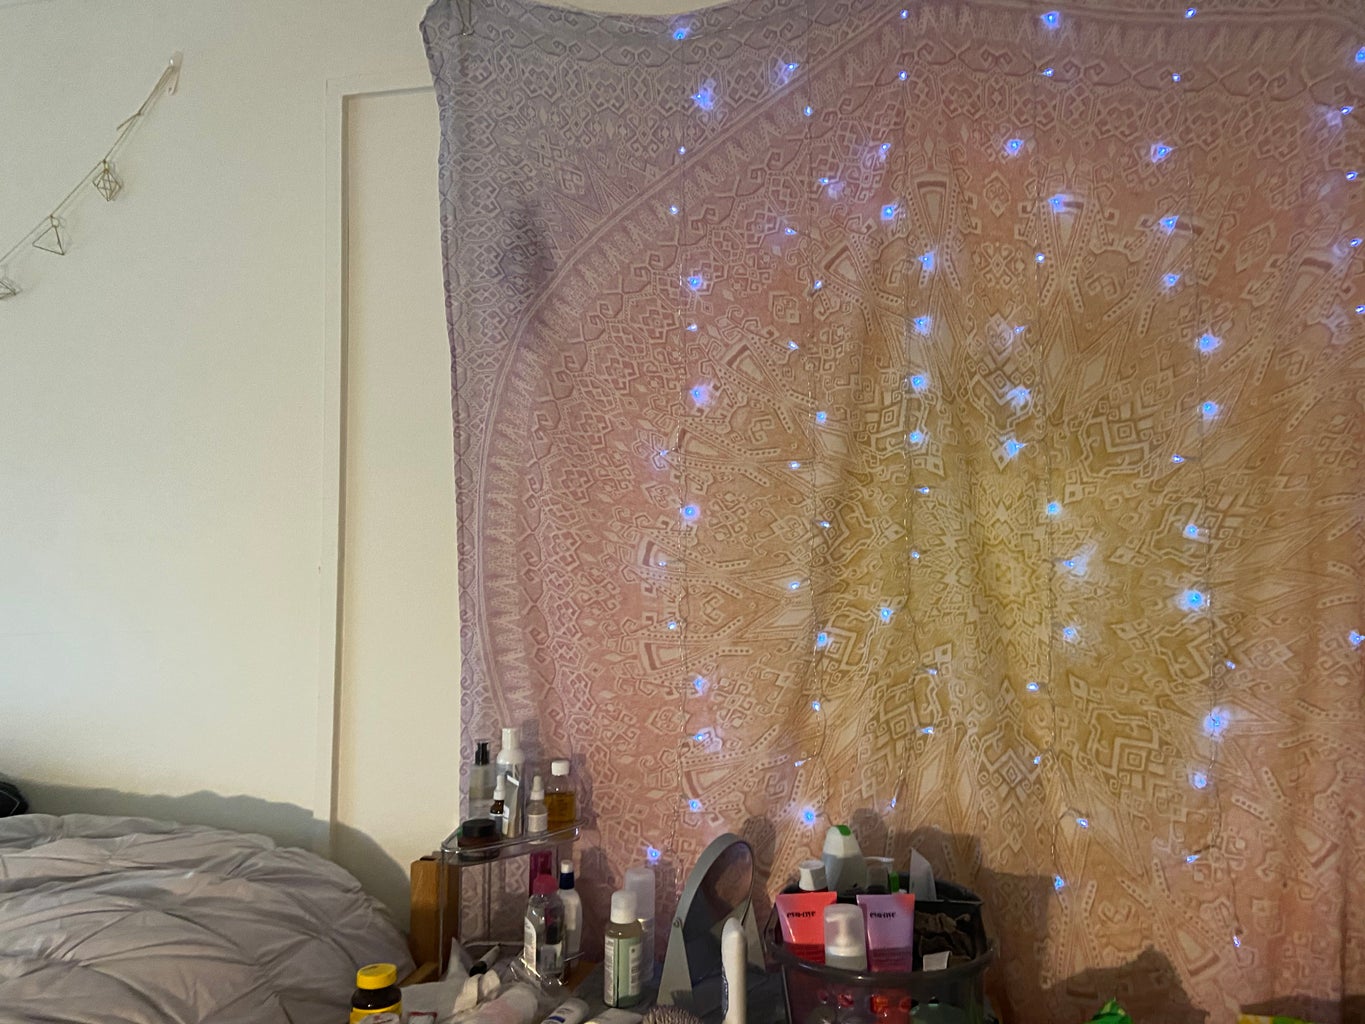 Tapestry and fairy lights in college dorm